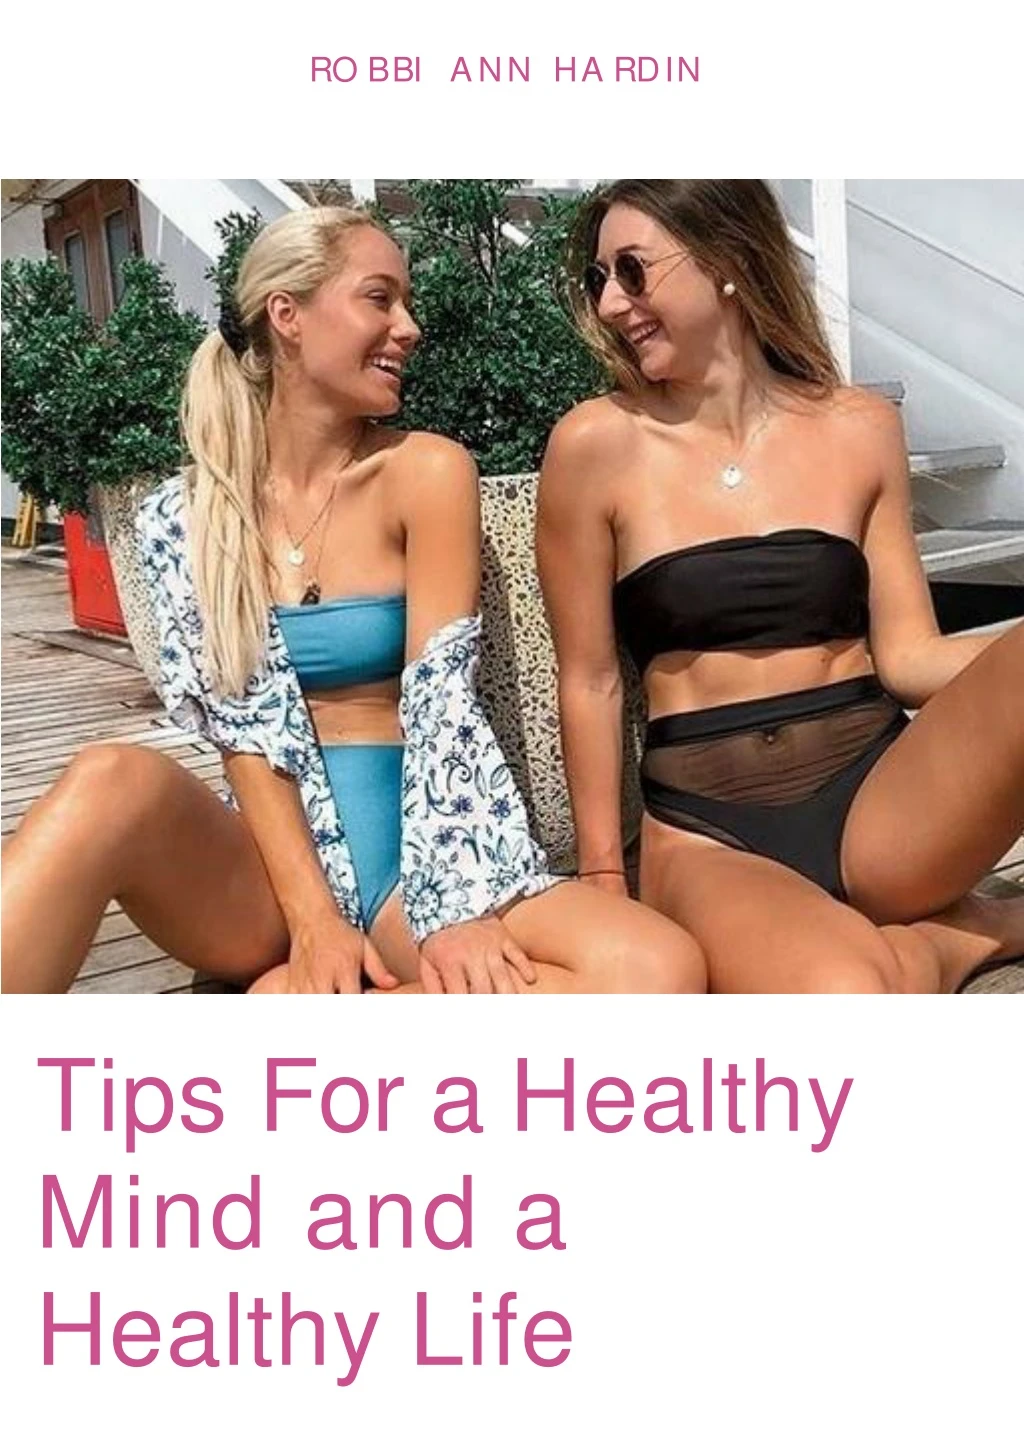 tips for a healthy mind and a healthy life